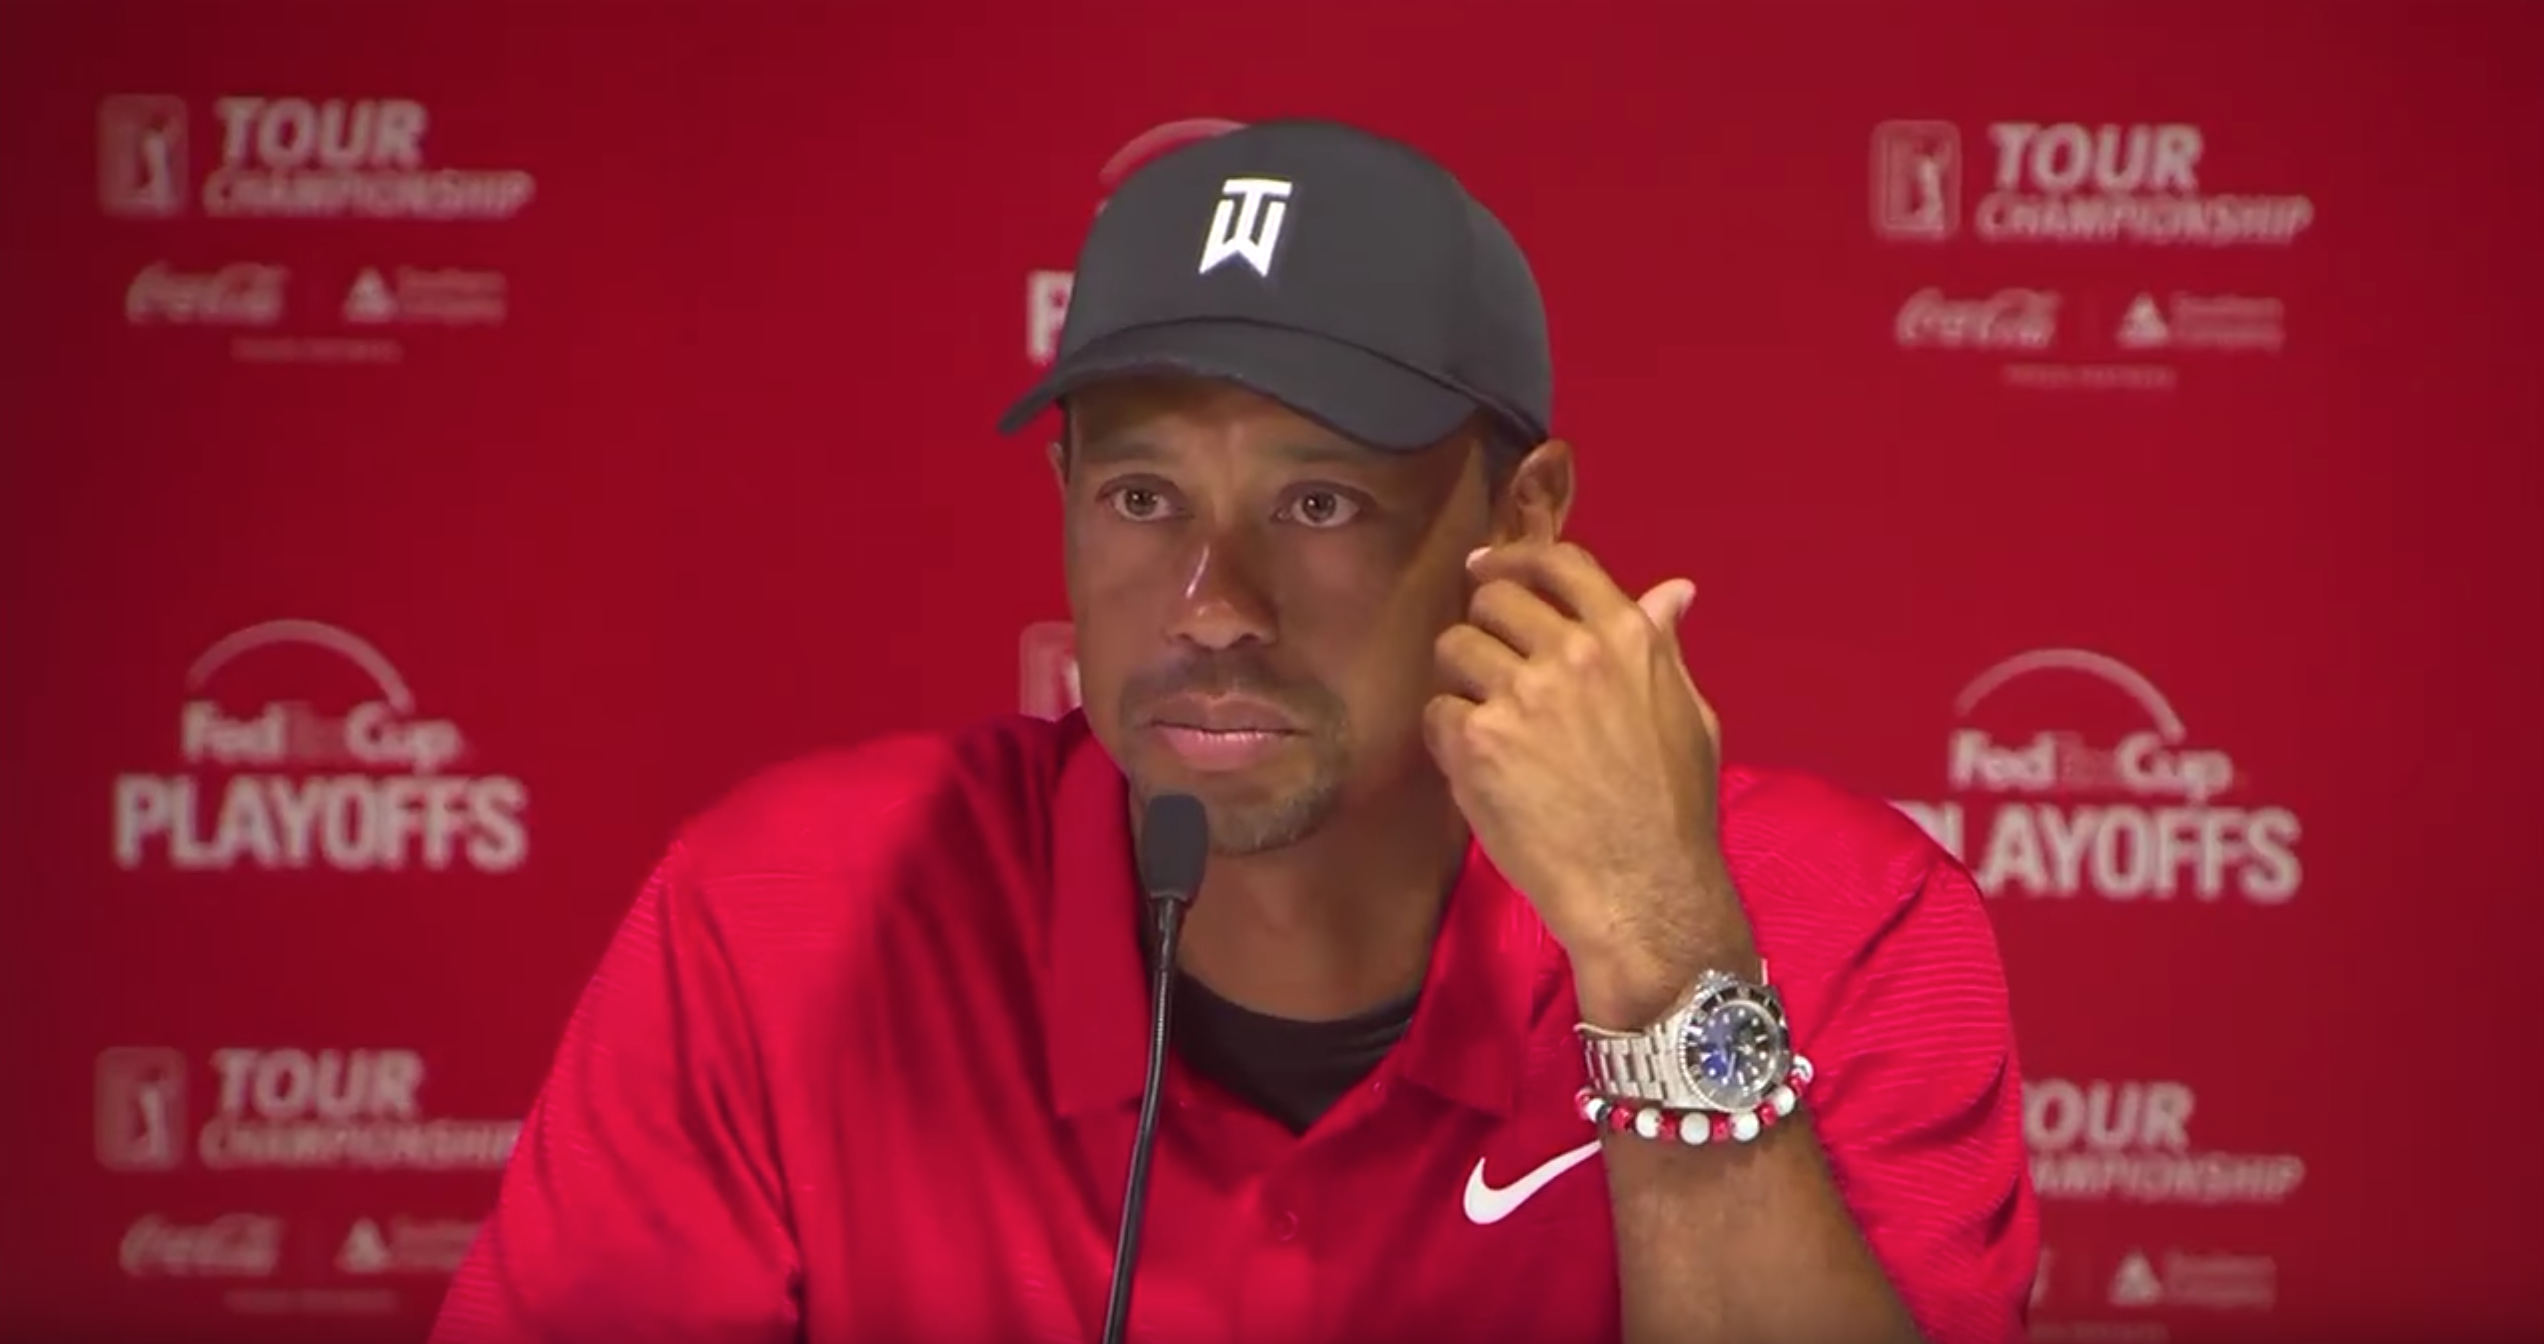 Tiger Woods and His Rolex Deepsea 116660